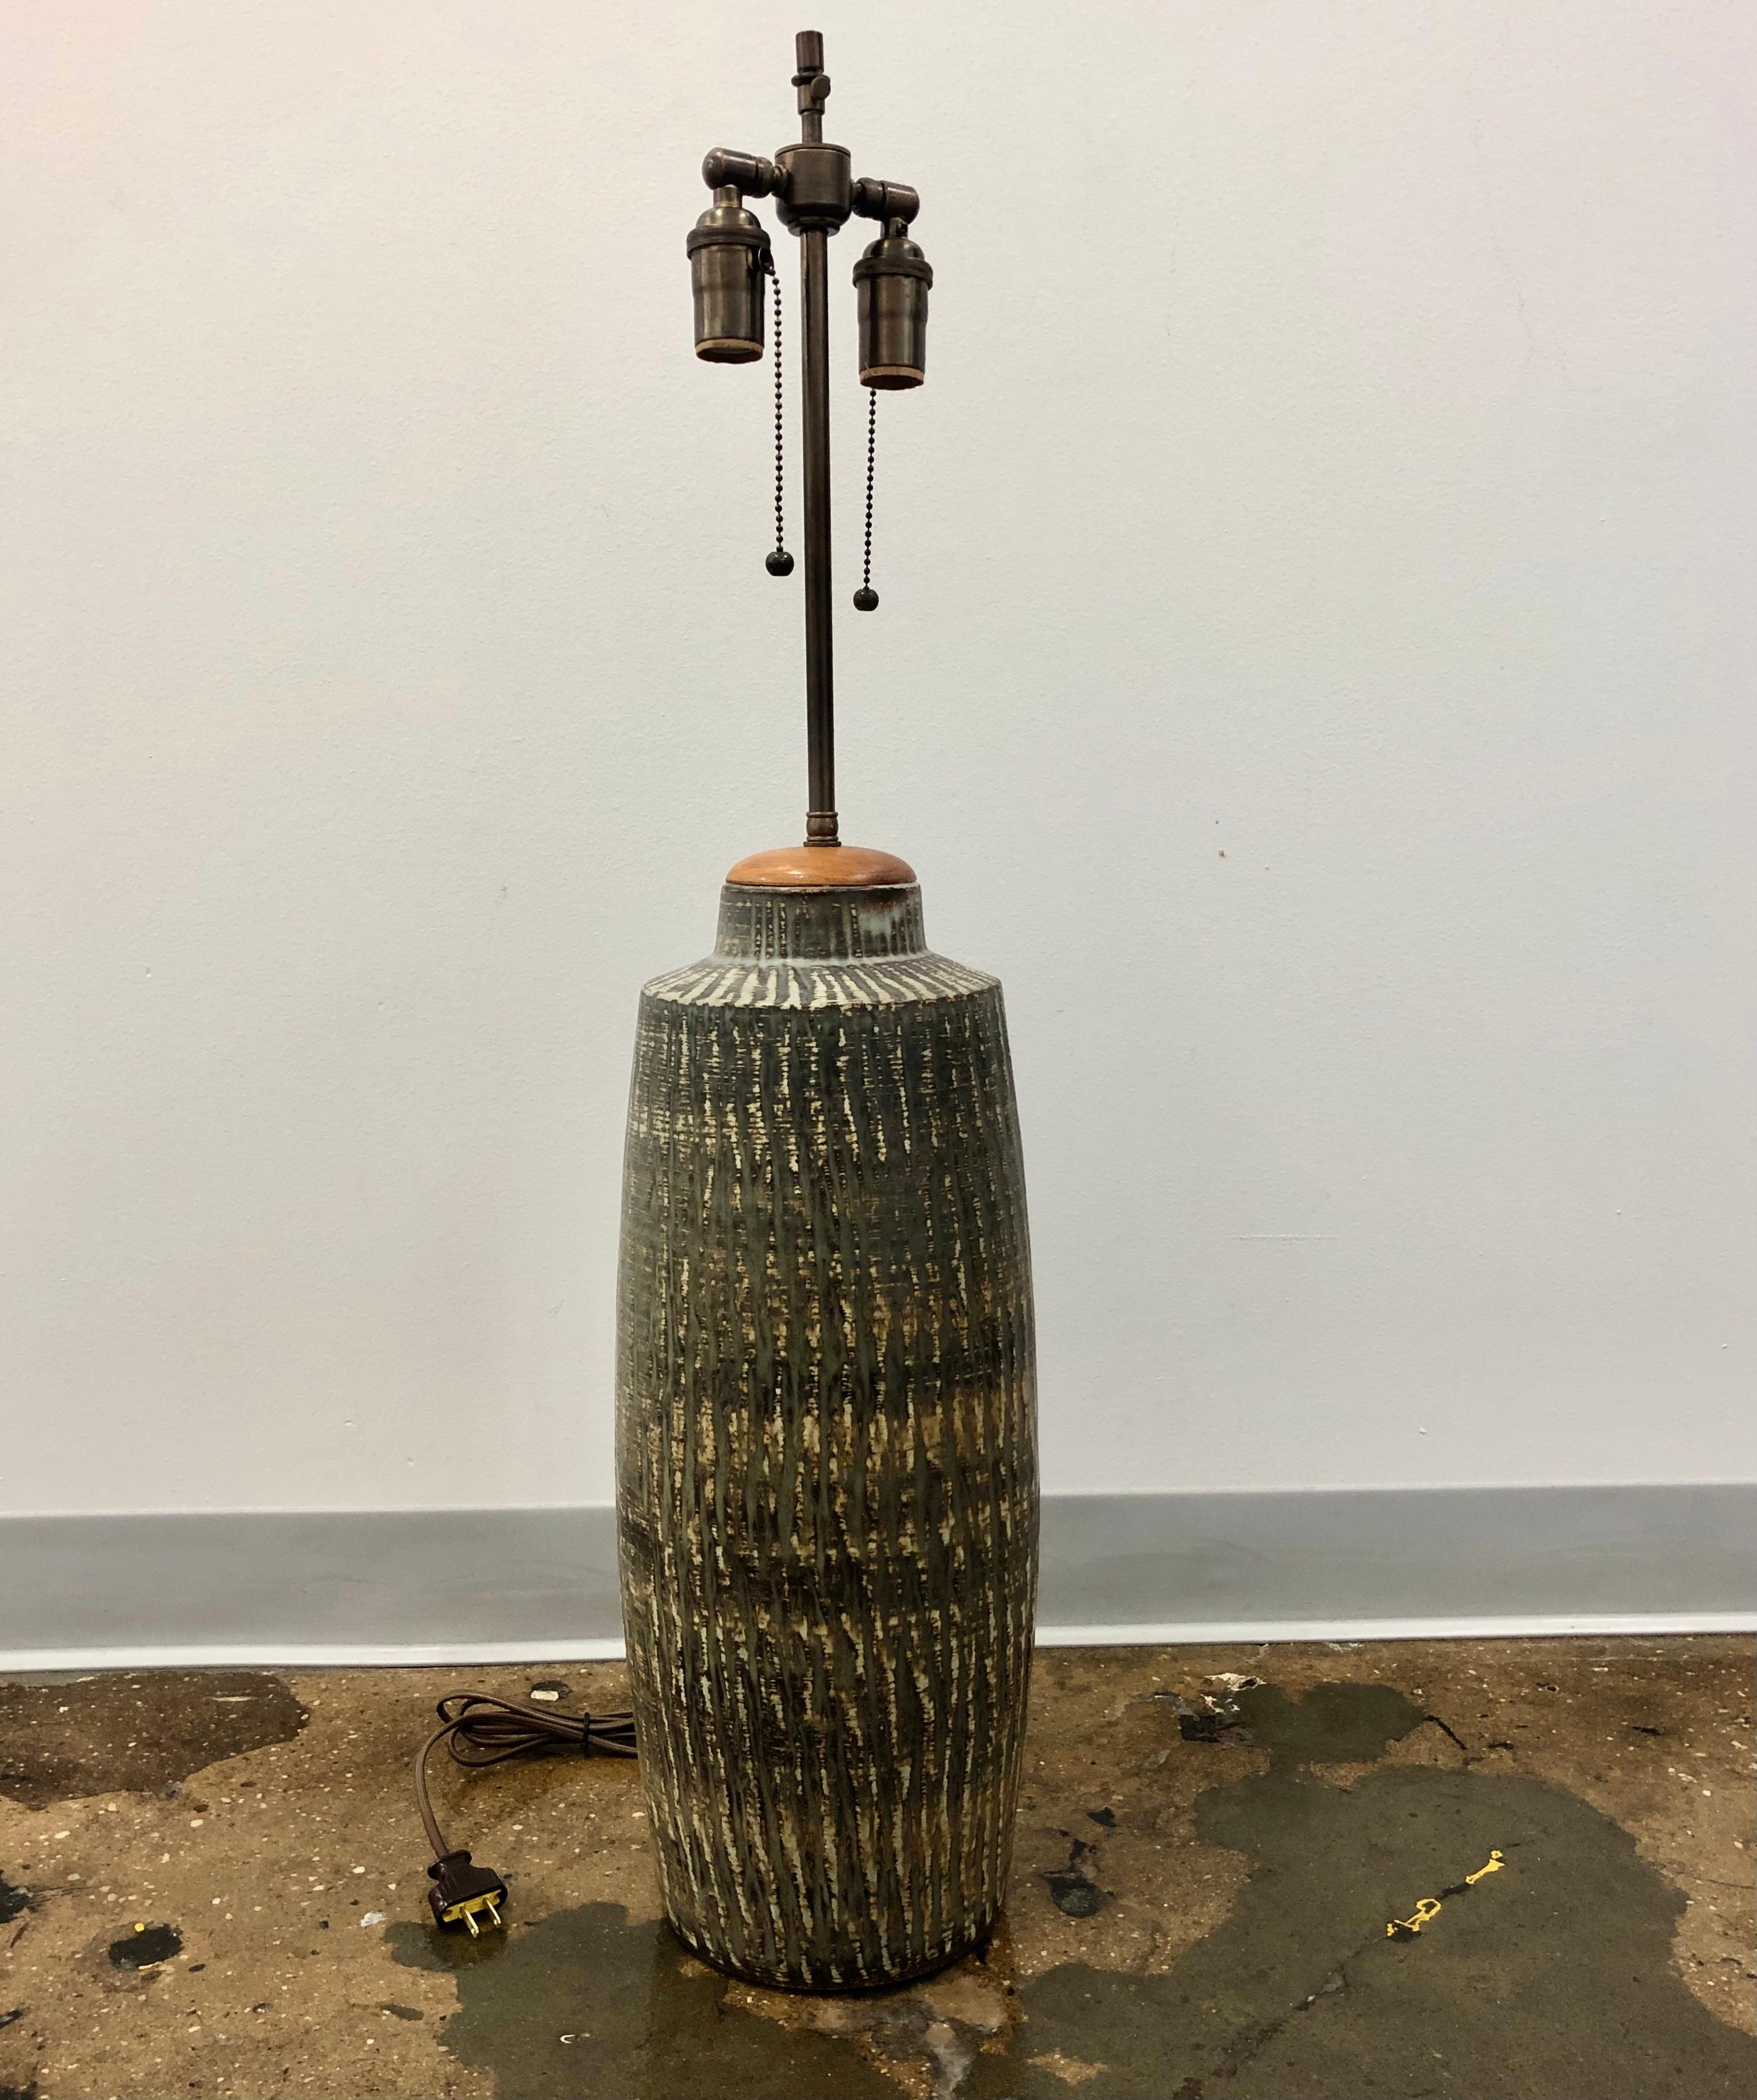 Large vase , now a table lamp by Gunnar Nylund for Rostrand, Sweden , Circa 1960.
Signed and marked by manufacturer.
Newly rewired. Stoneware base dimensions 21